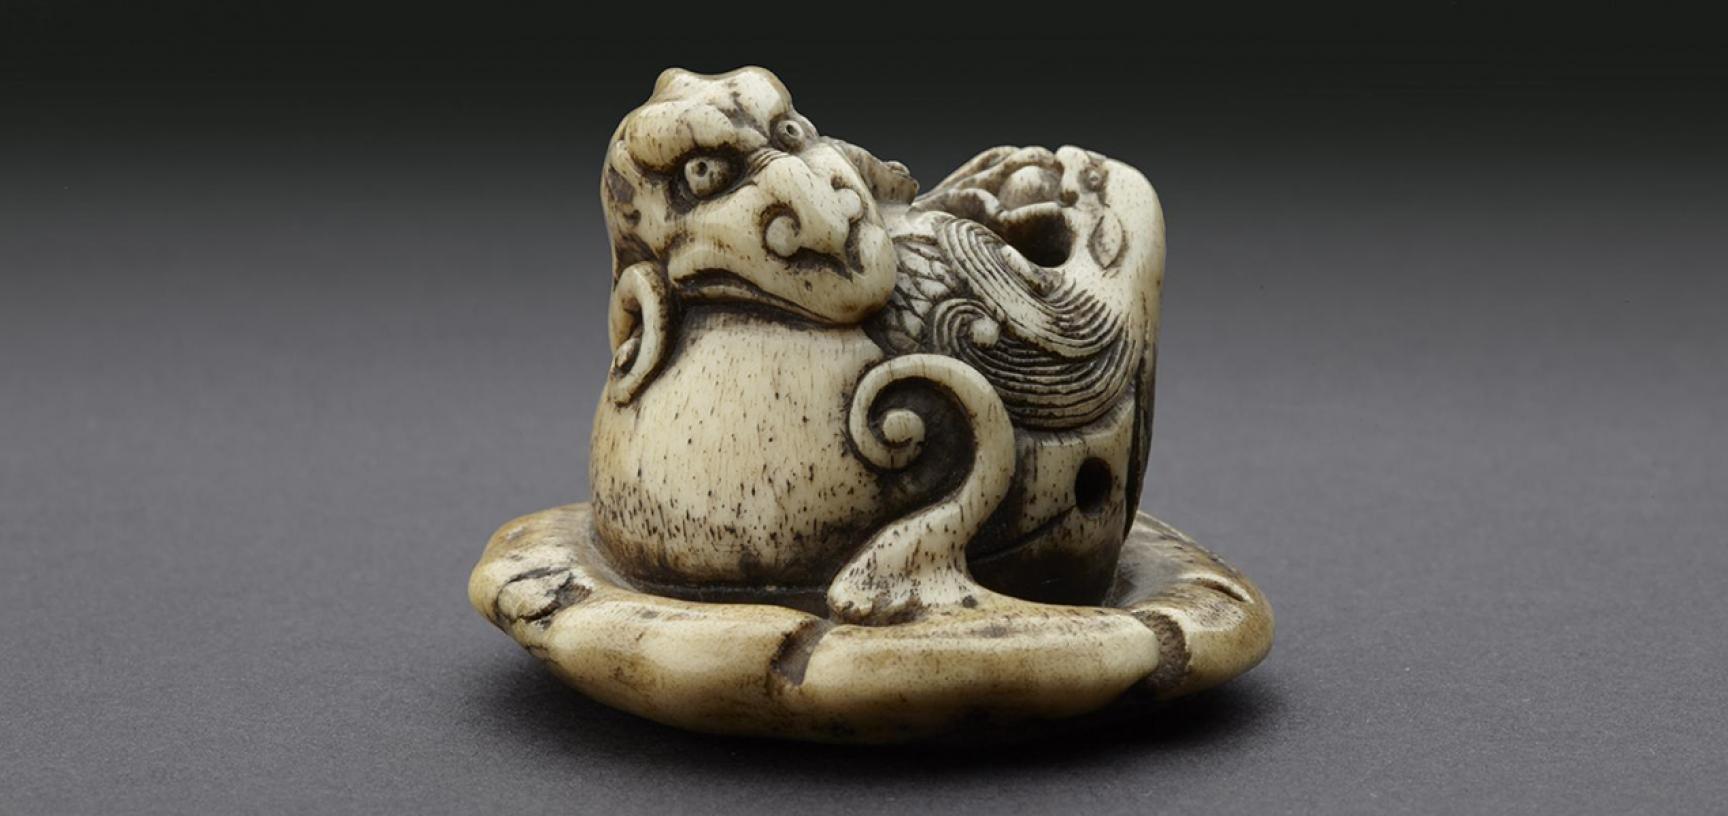 Netsuke in the form of a rain dragon coiled around a mokugyō, a Buddhist percussion instrument from the Ashmolean collections